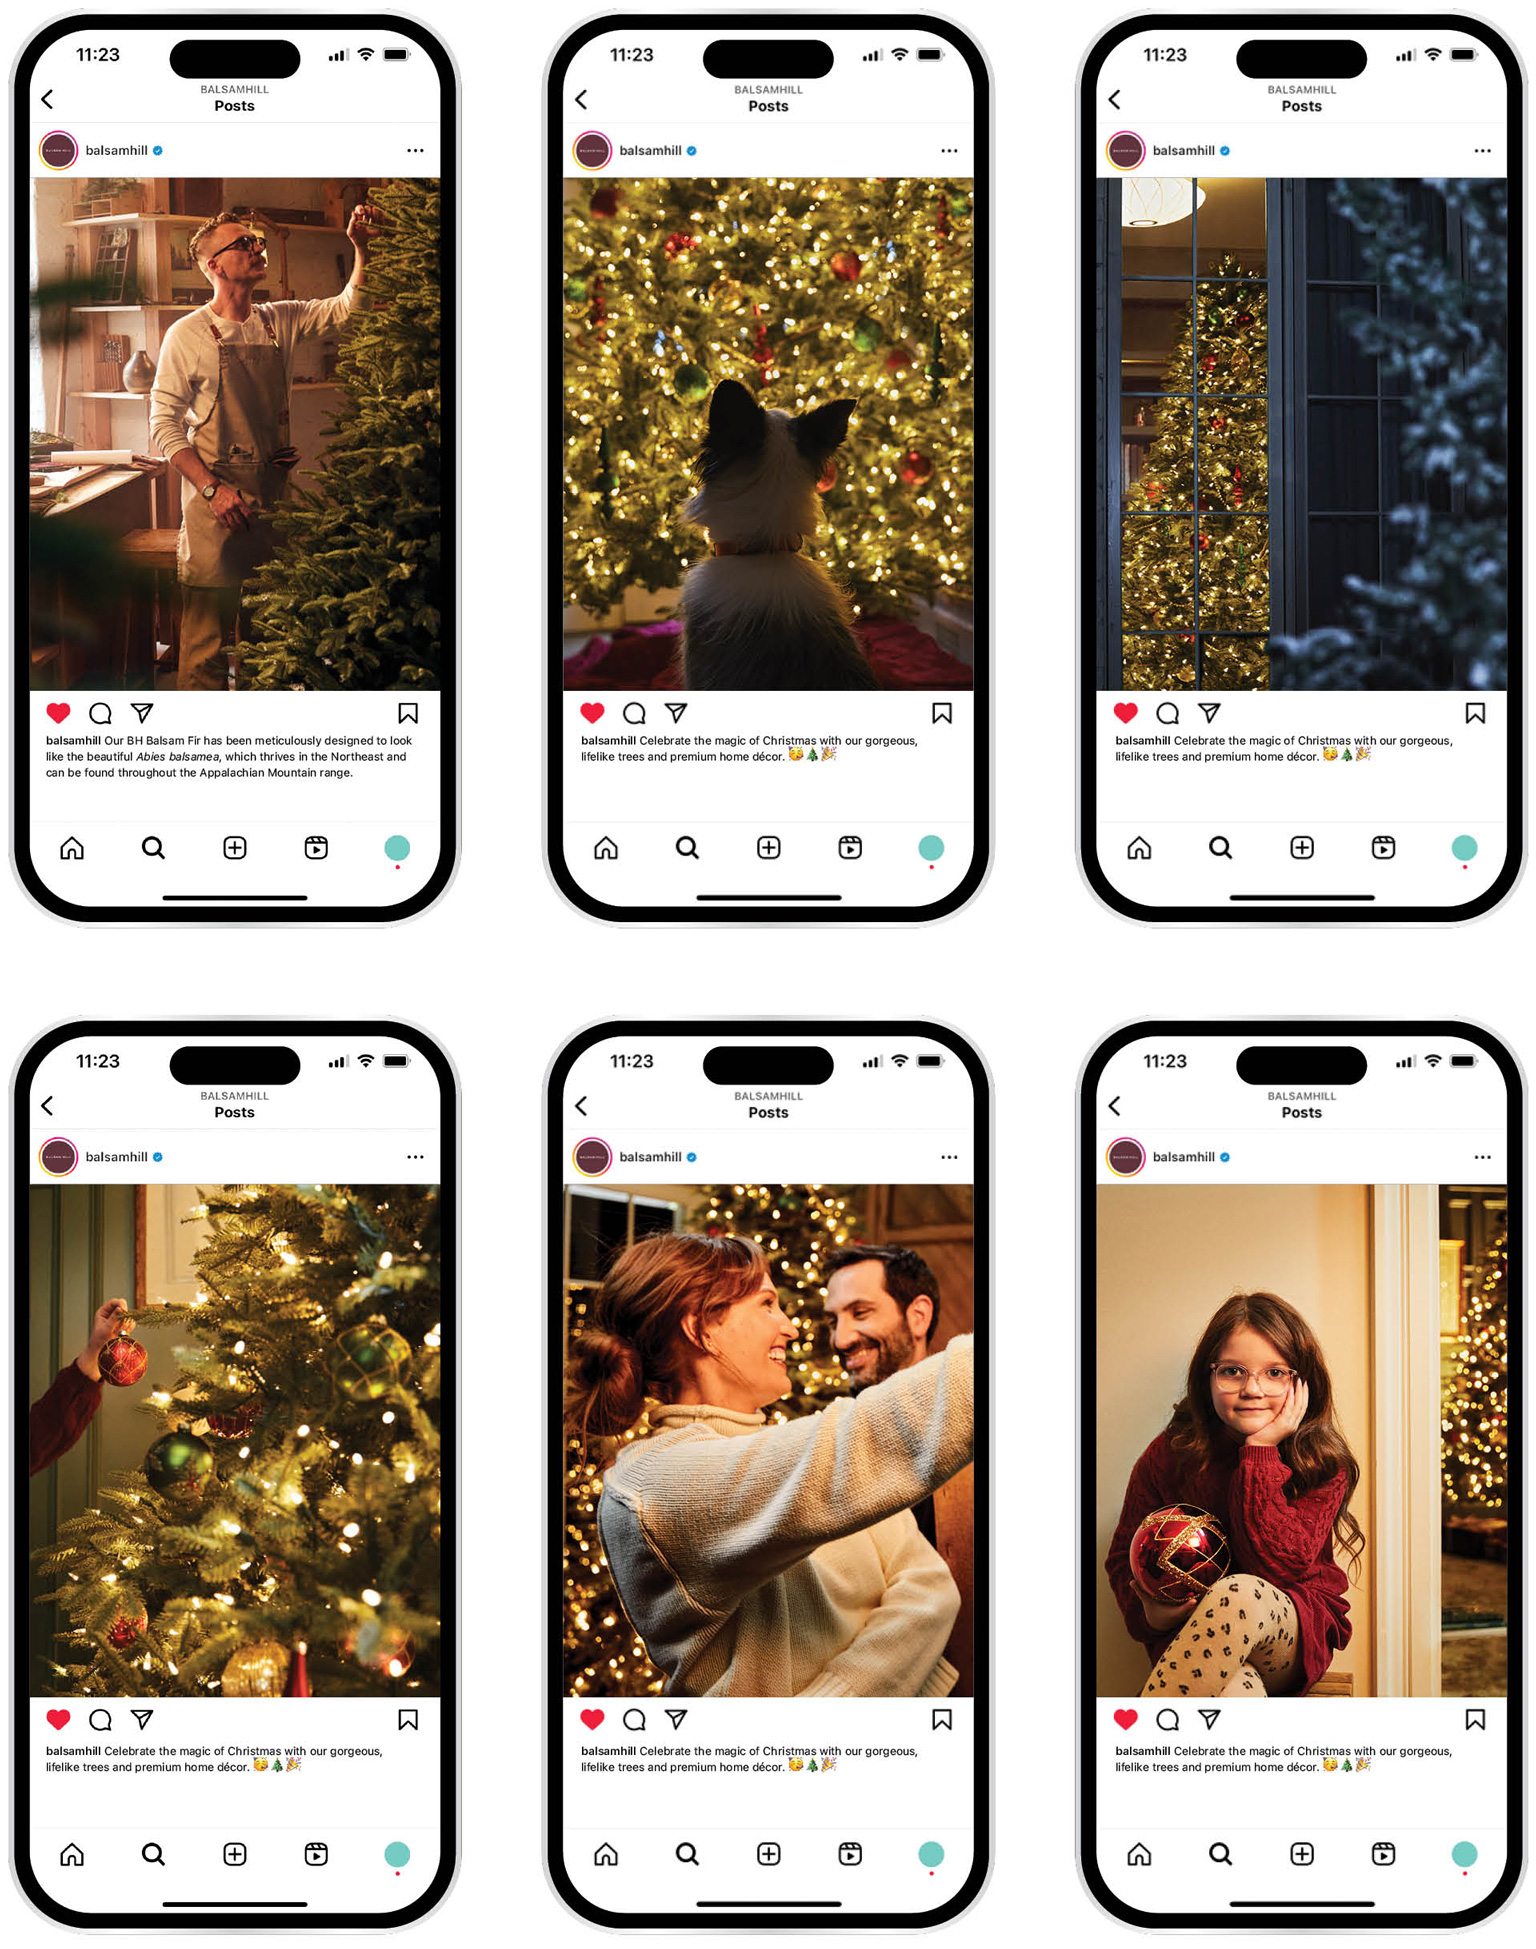 6 social posts for Balsam Hill's holiday campaign